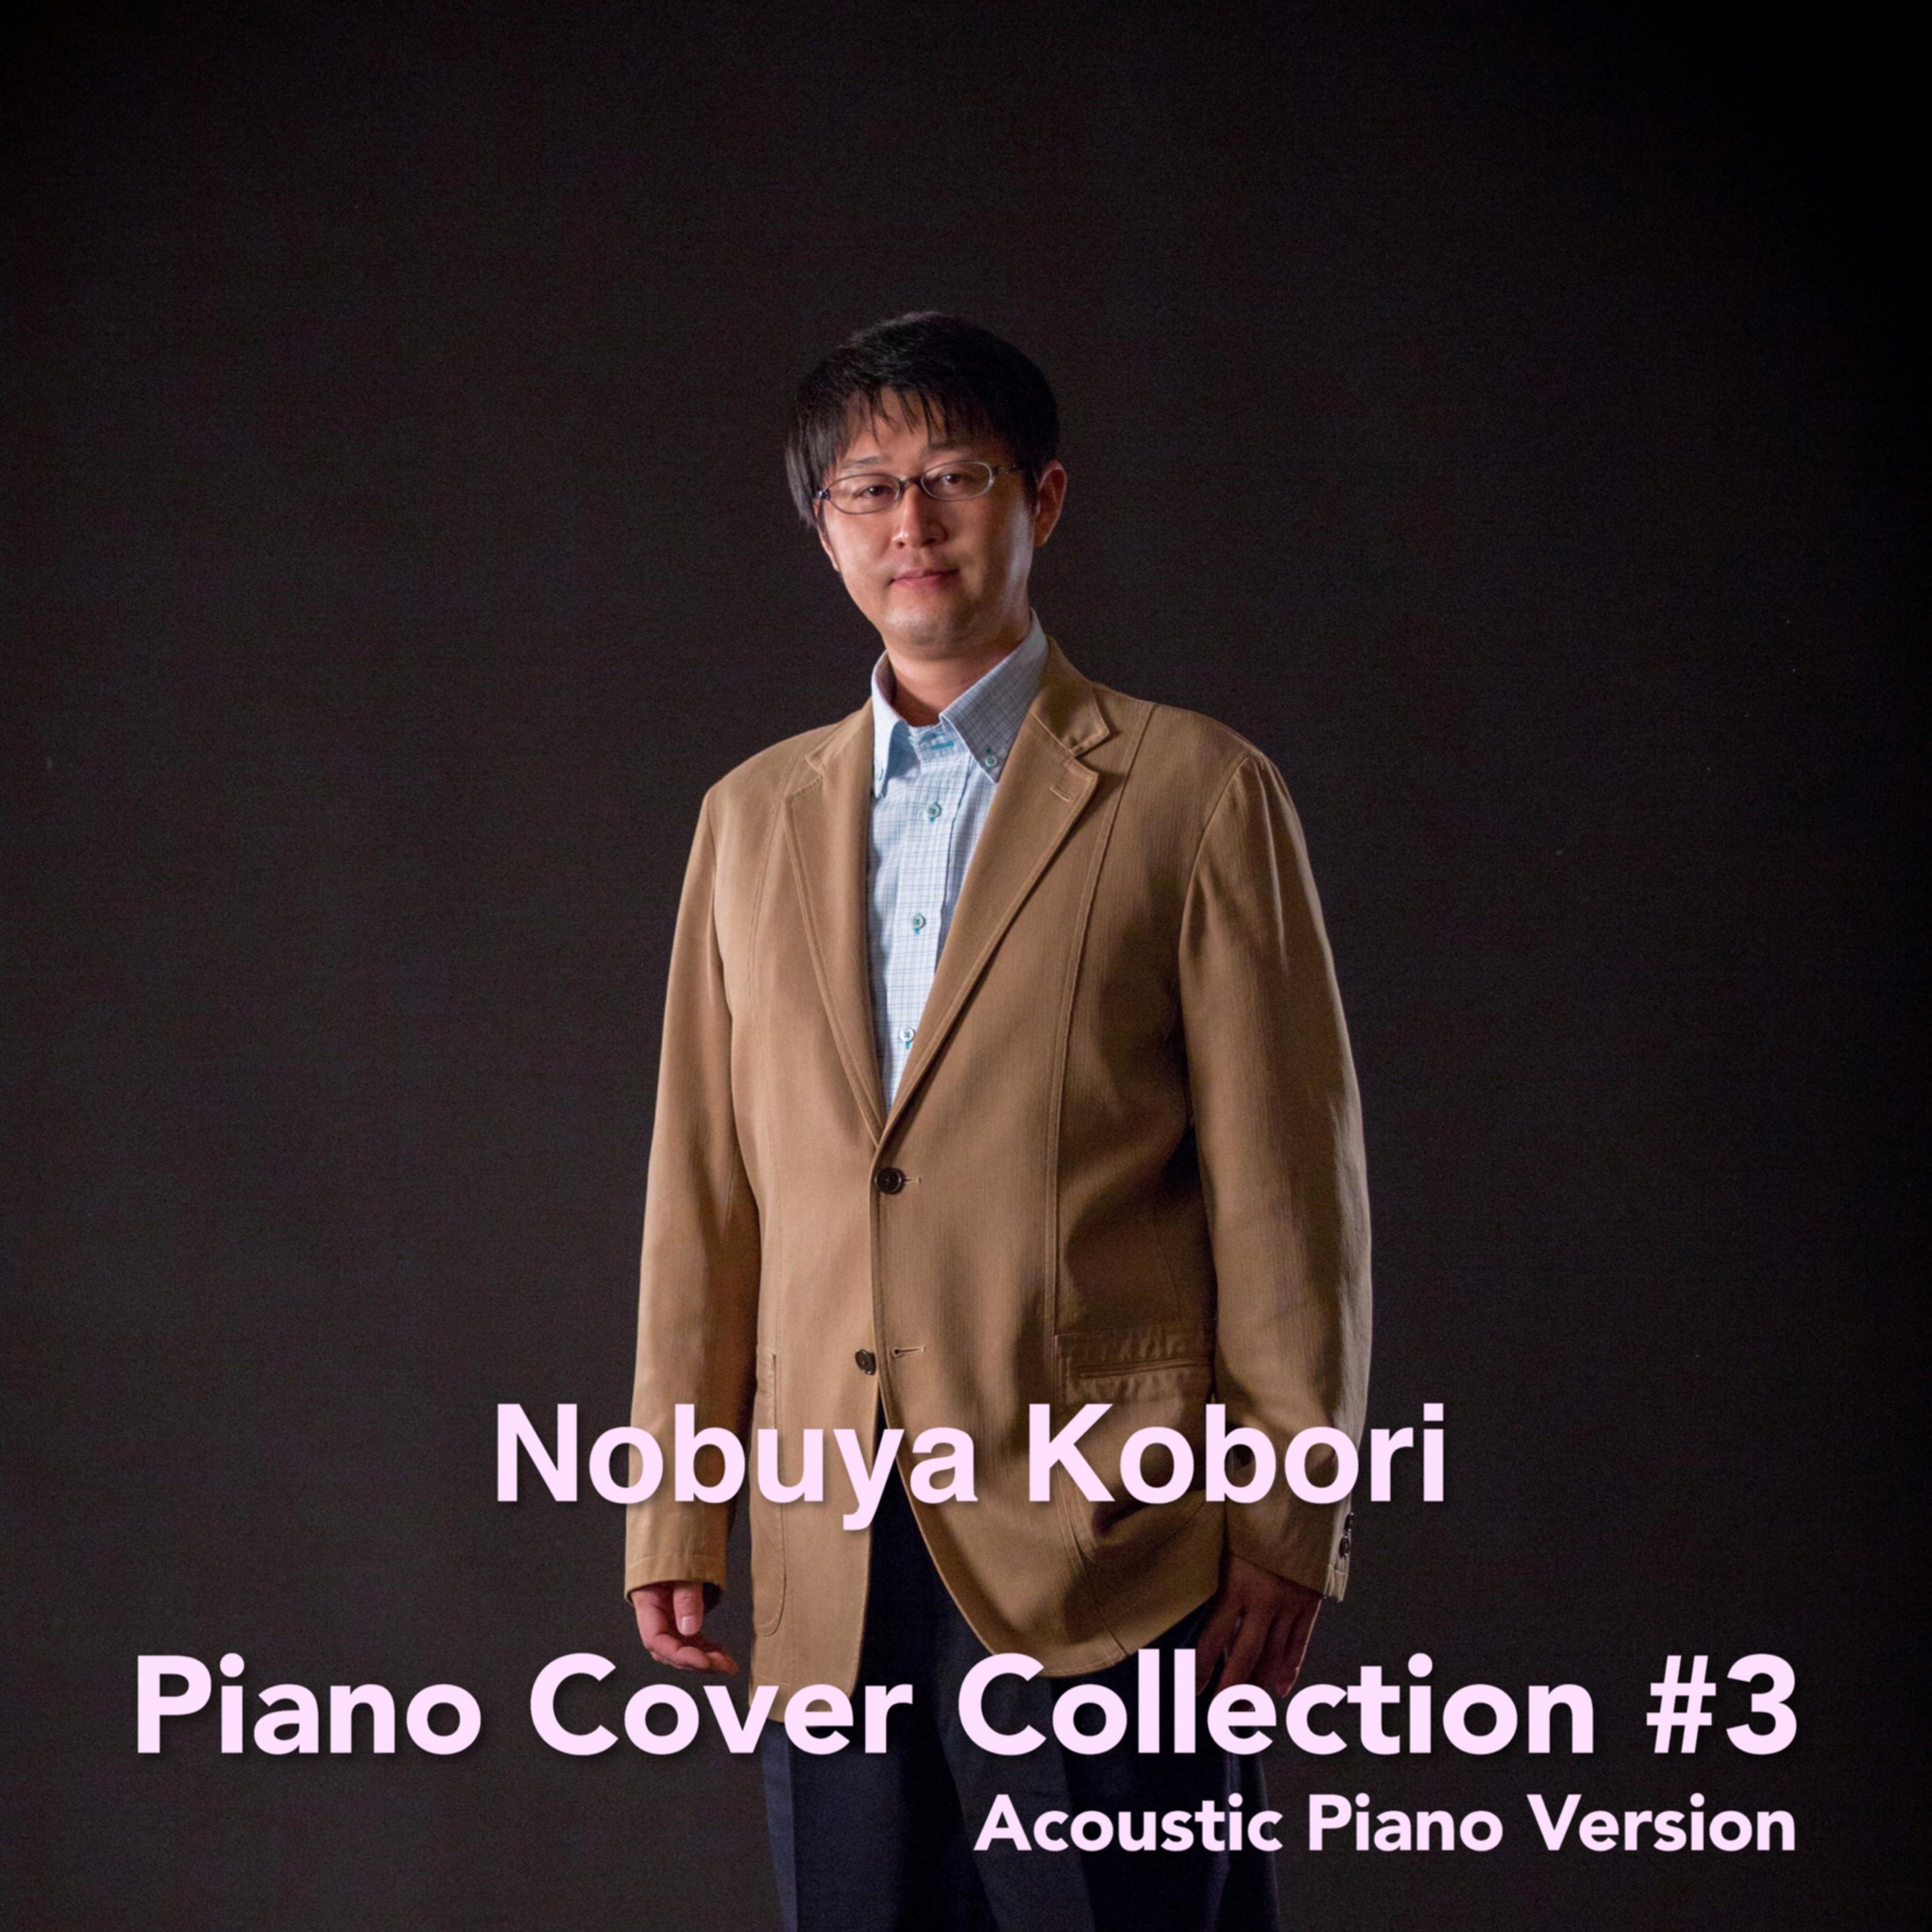 Piano Cover Collection #3